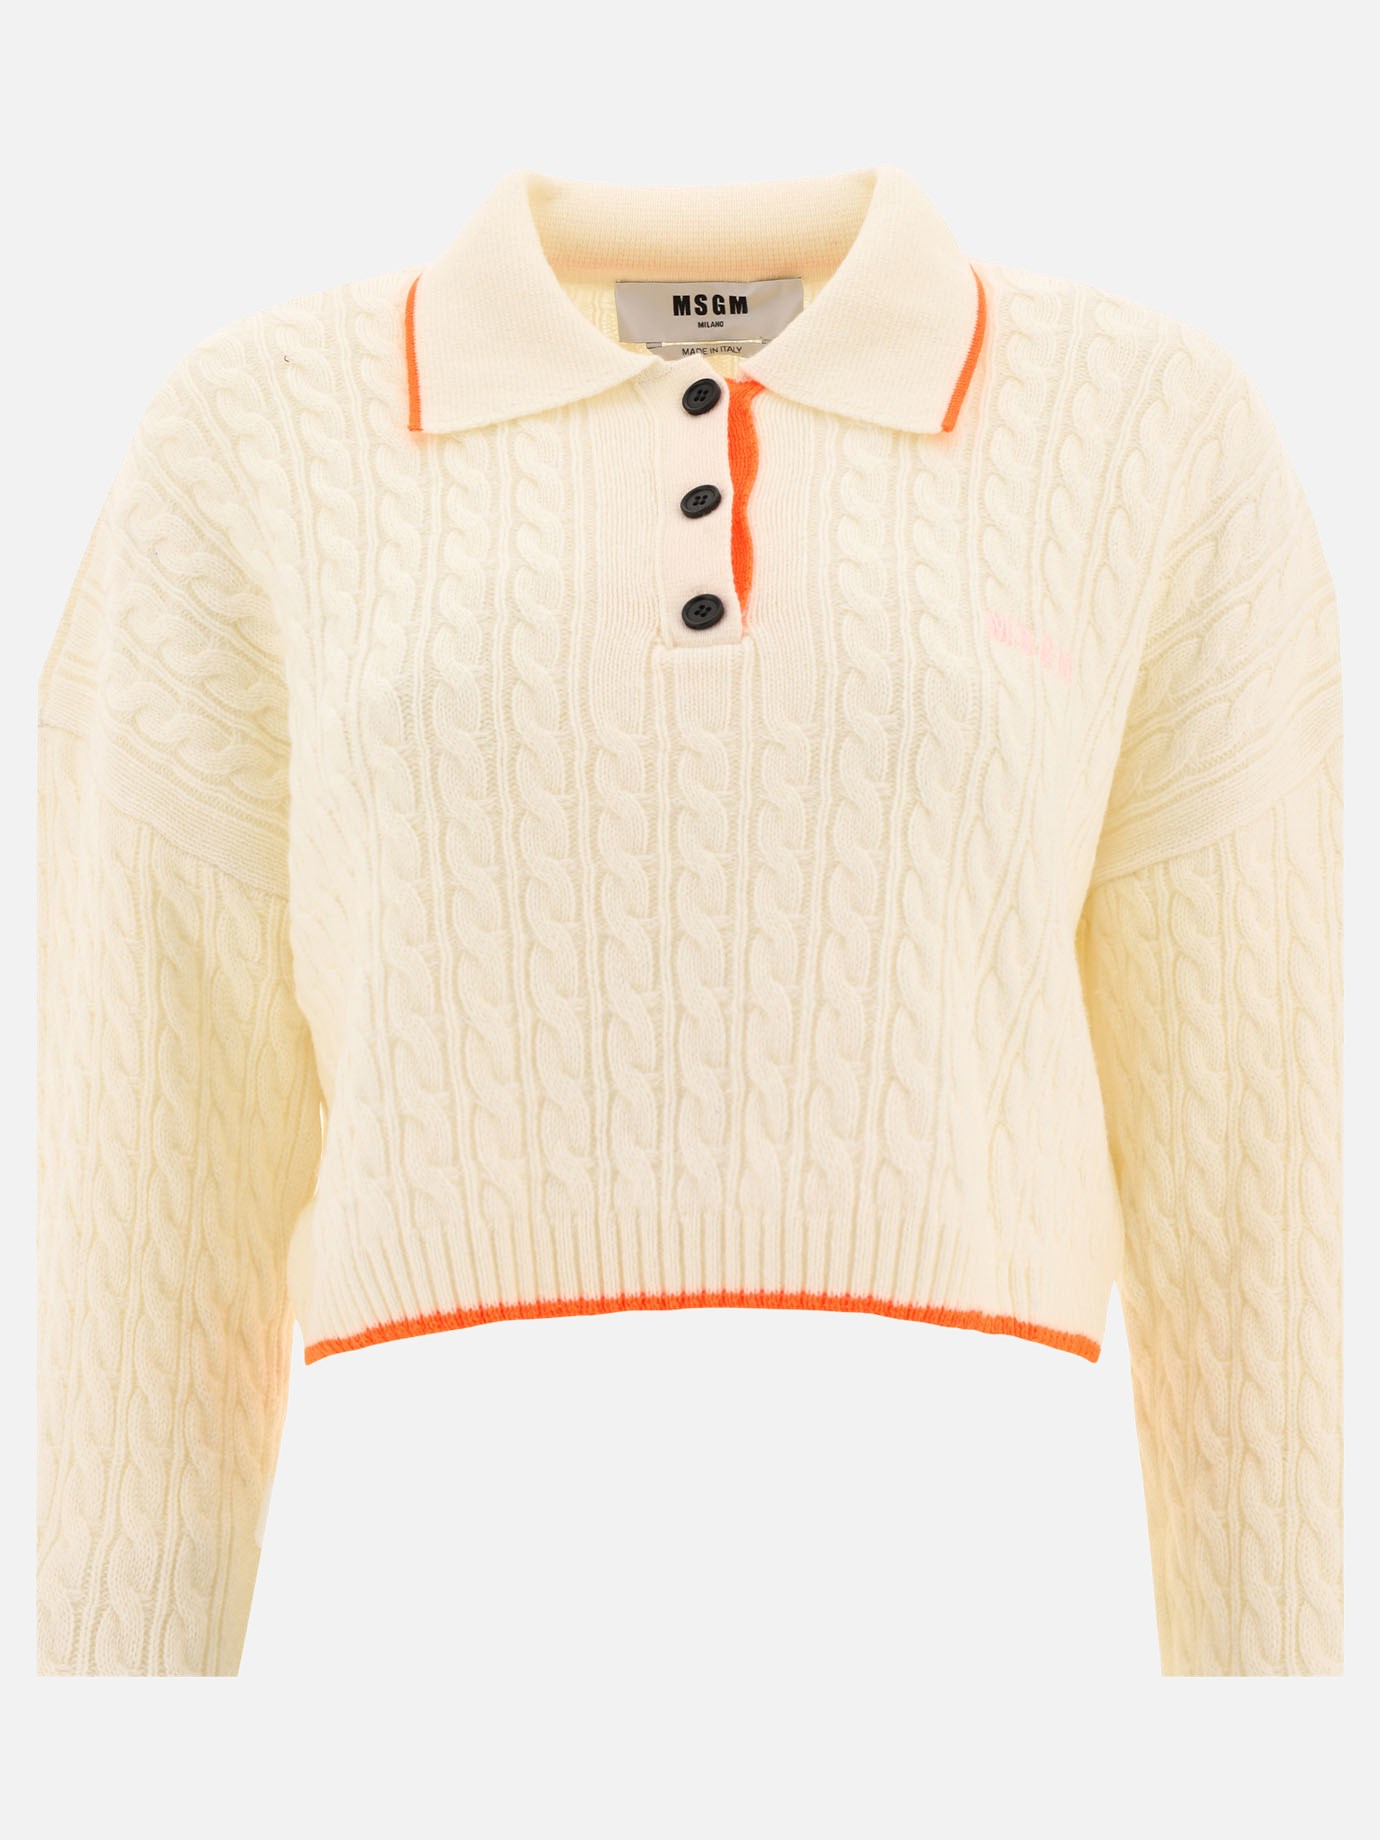 Cable cropped sweaterby Msgm - 2